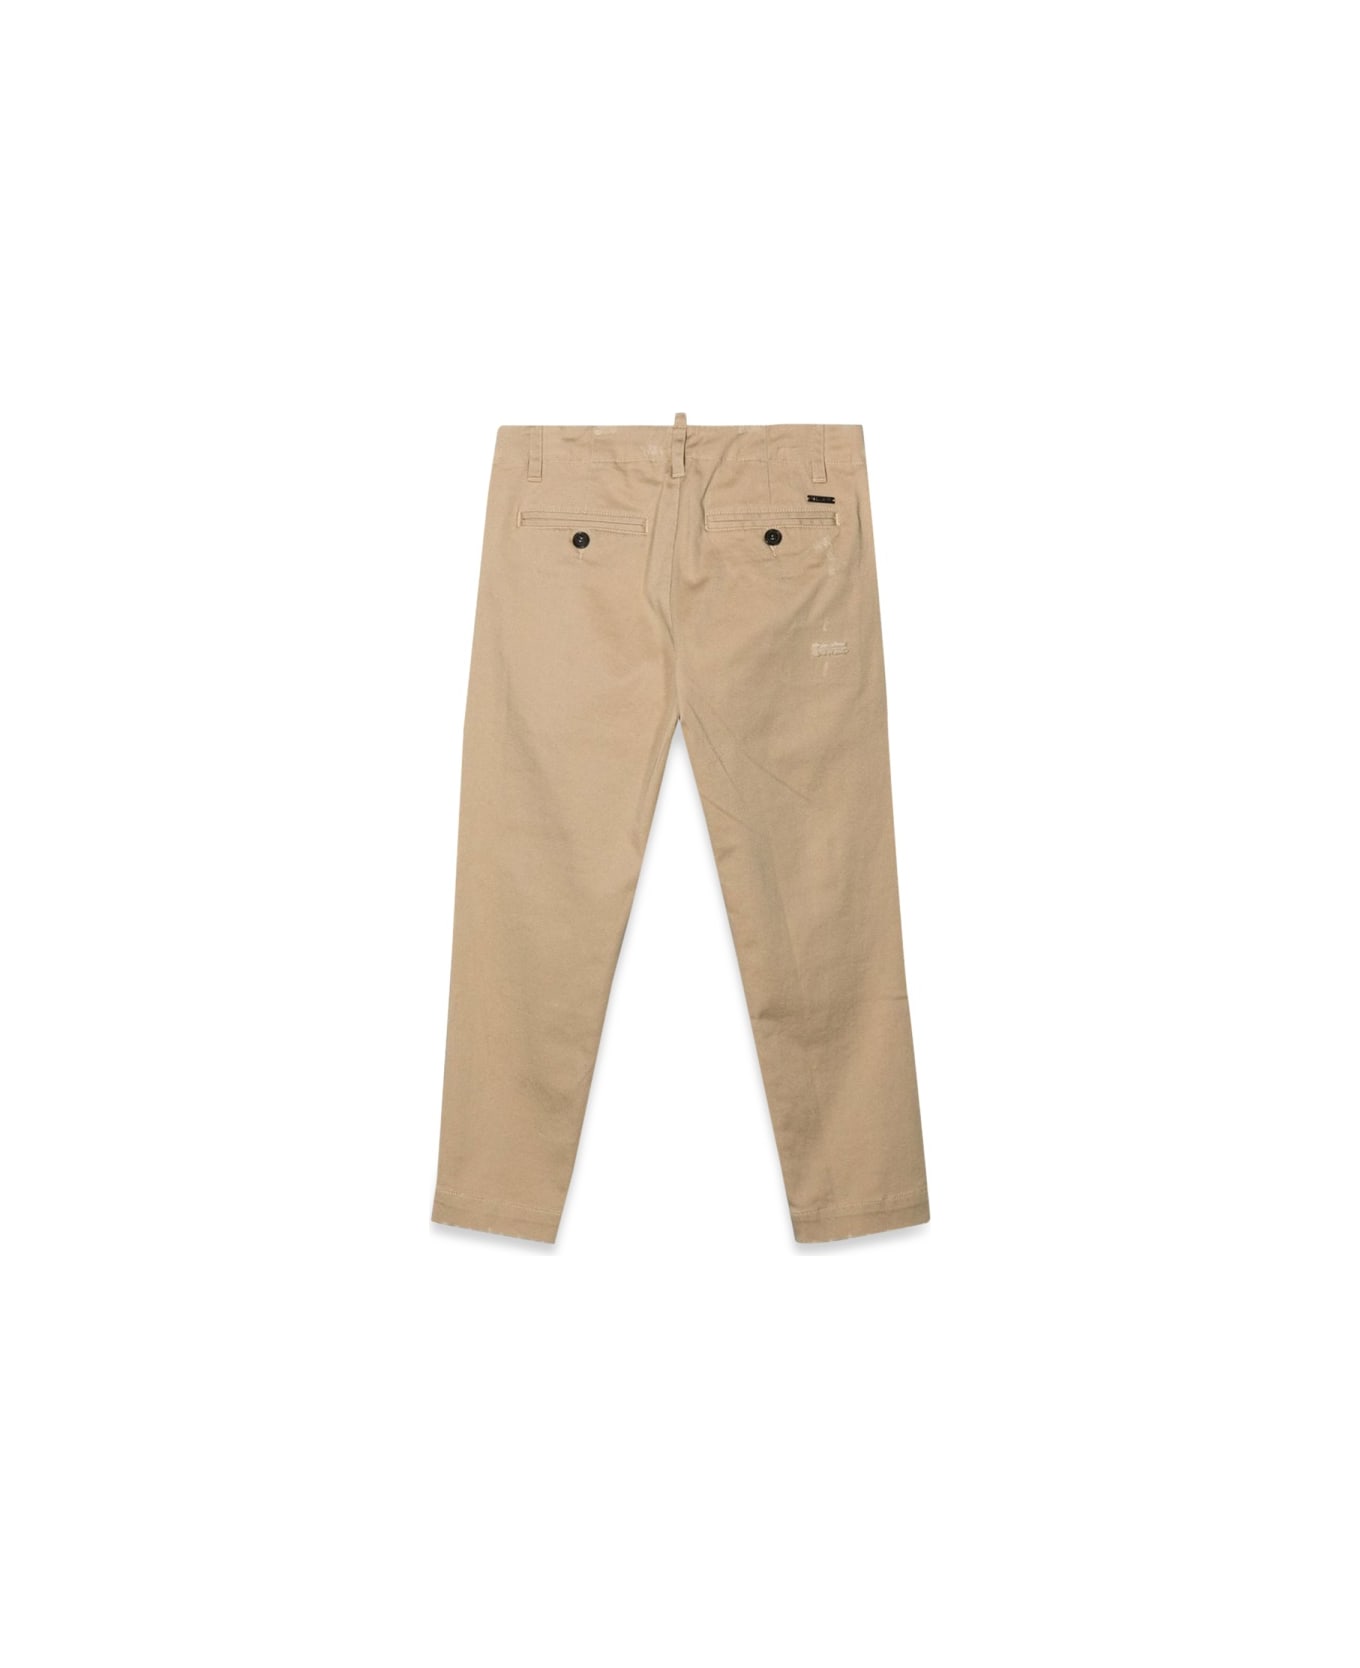 Dsquared2 Pants With Patches - BEIGE